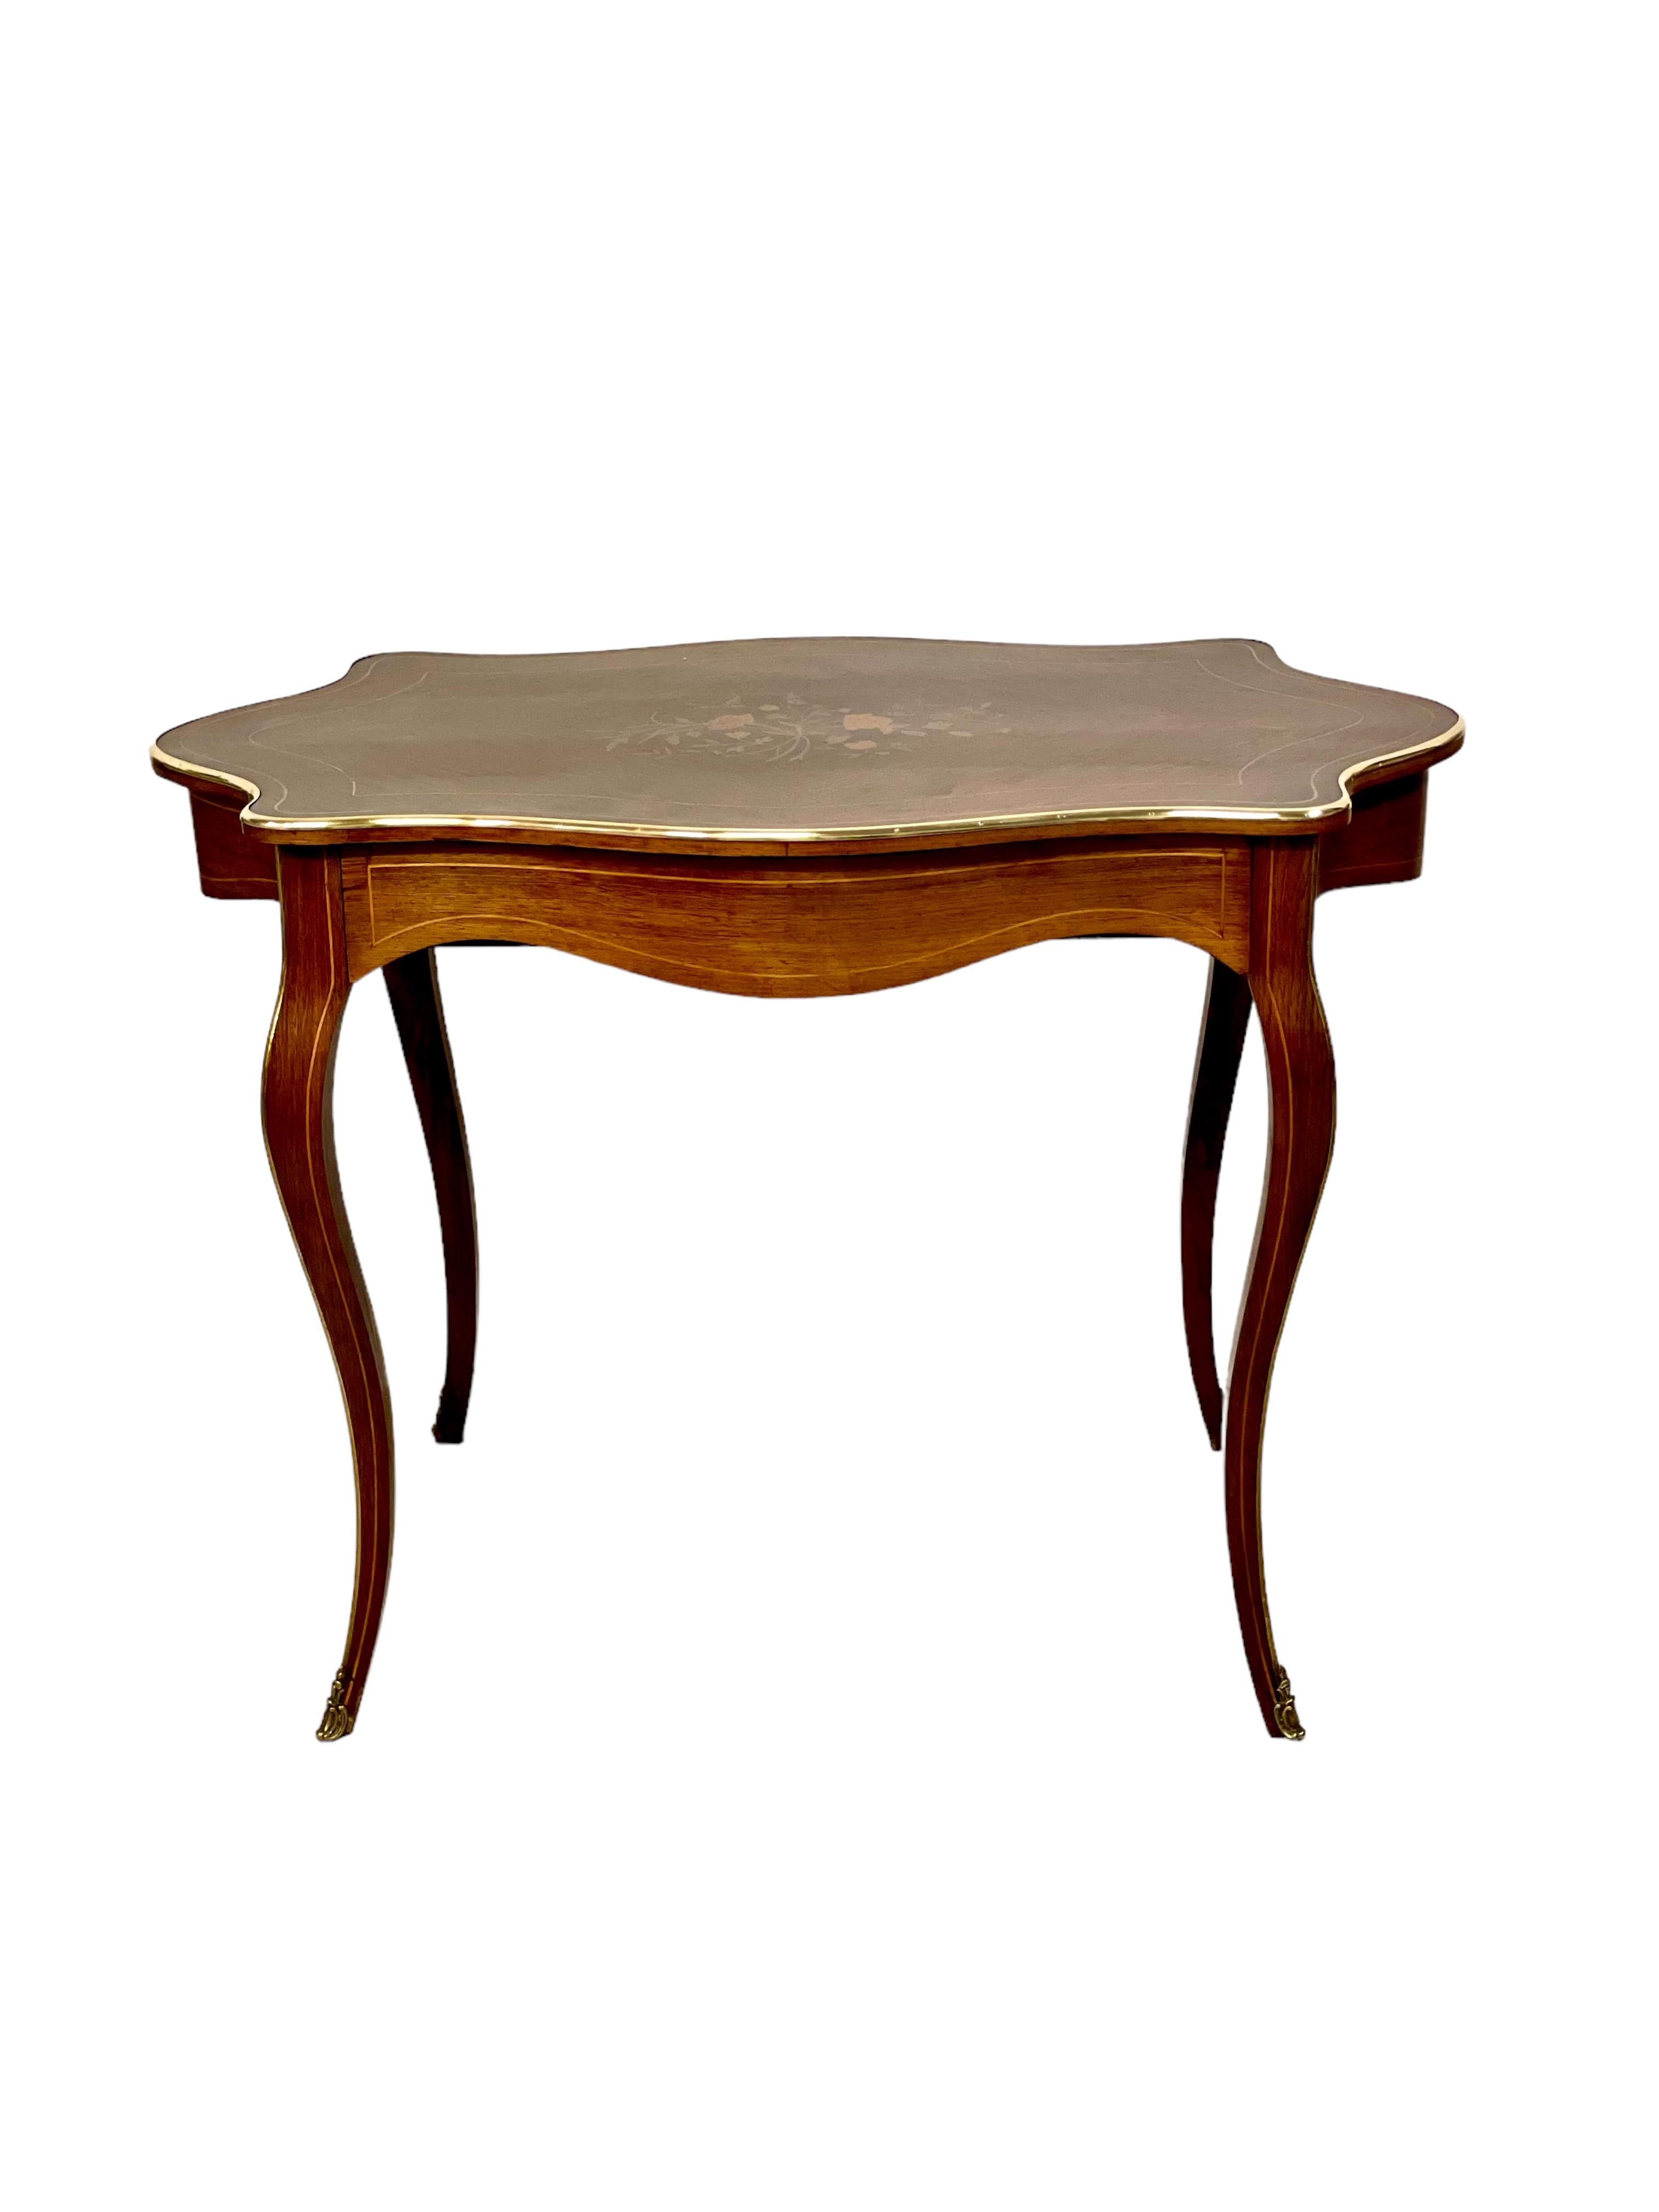 Extremely elegant Louis XV Style writing desk or center table, with a gracefully adorned floral marquetry and intricate borders on the tray, revealing a single drawer and elegantly curved legs in the Louis XV Style. 
This exquisite table is dating